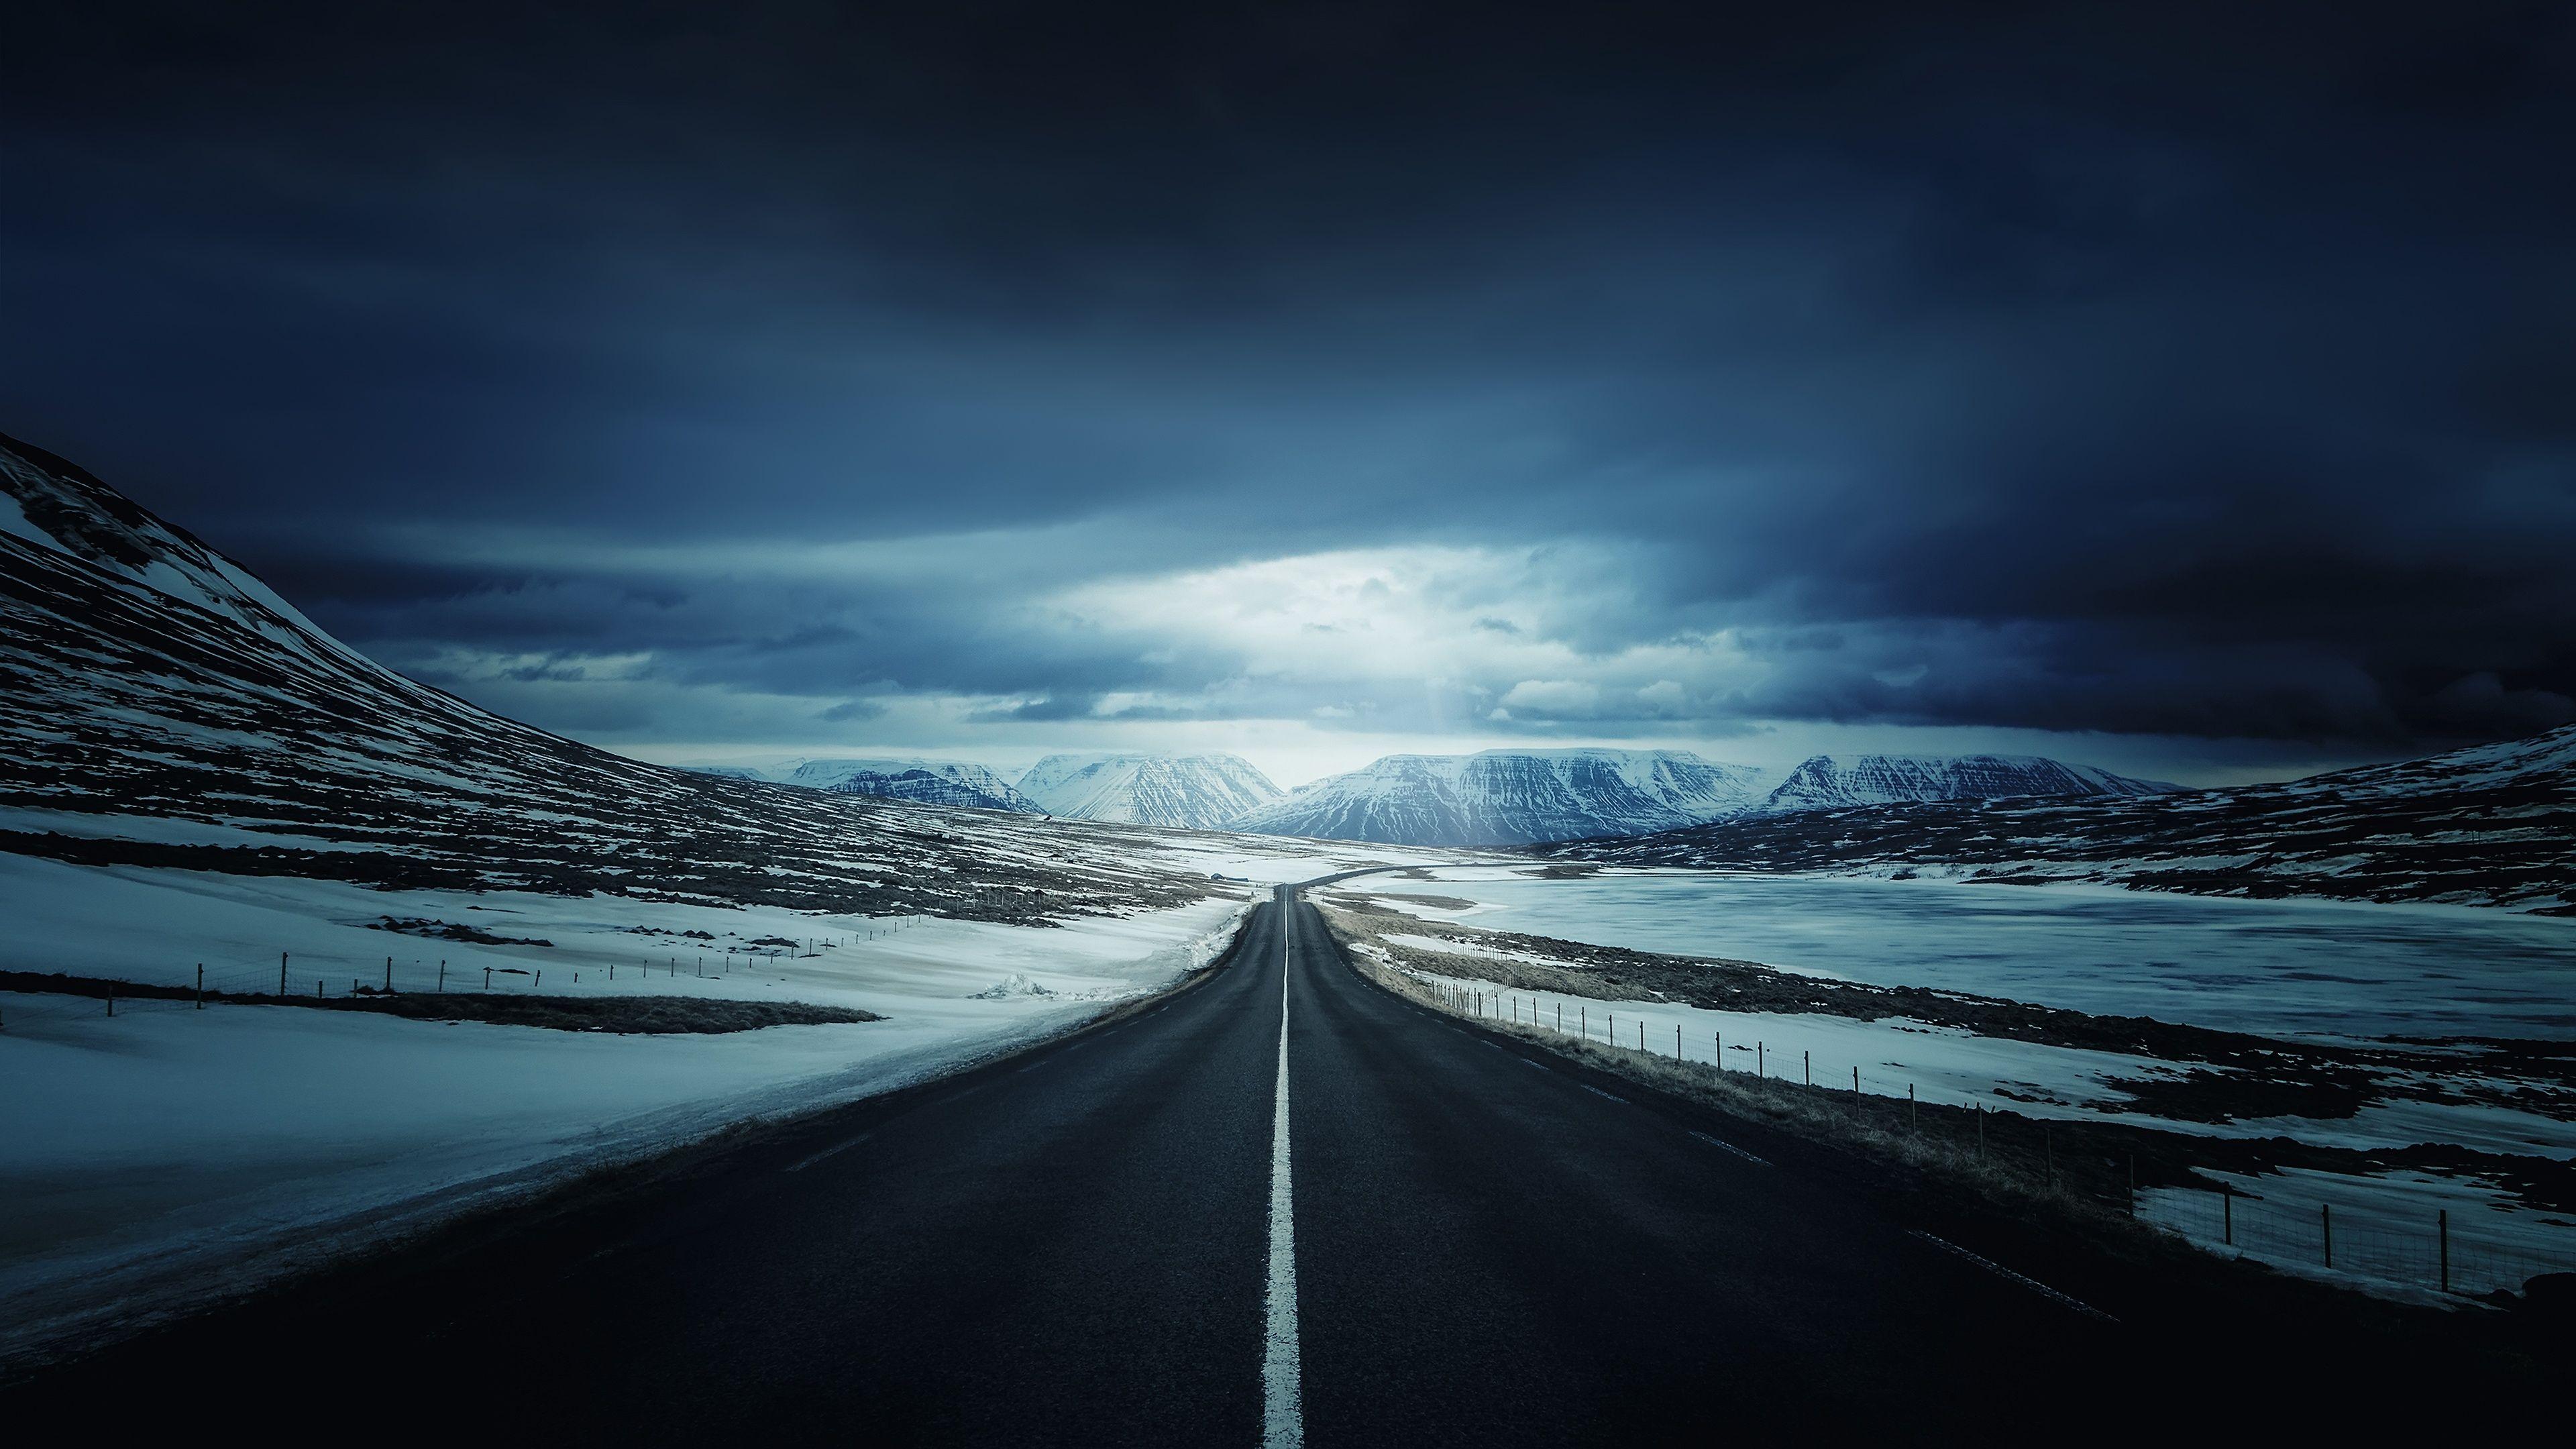 Iceland's Ring Road Wallpaper in jpg format for free download